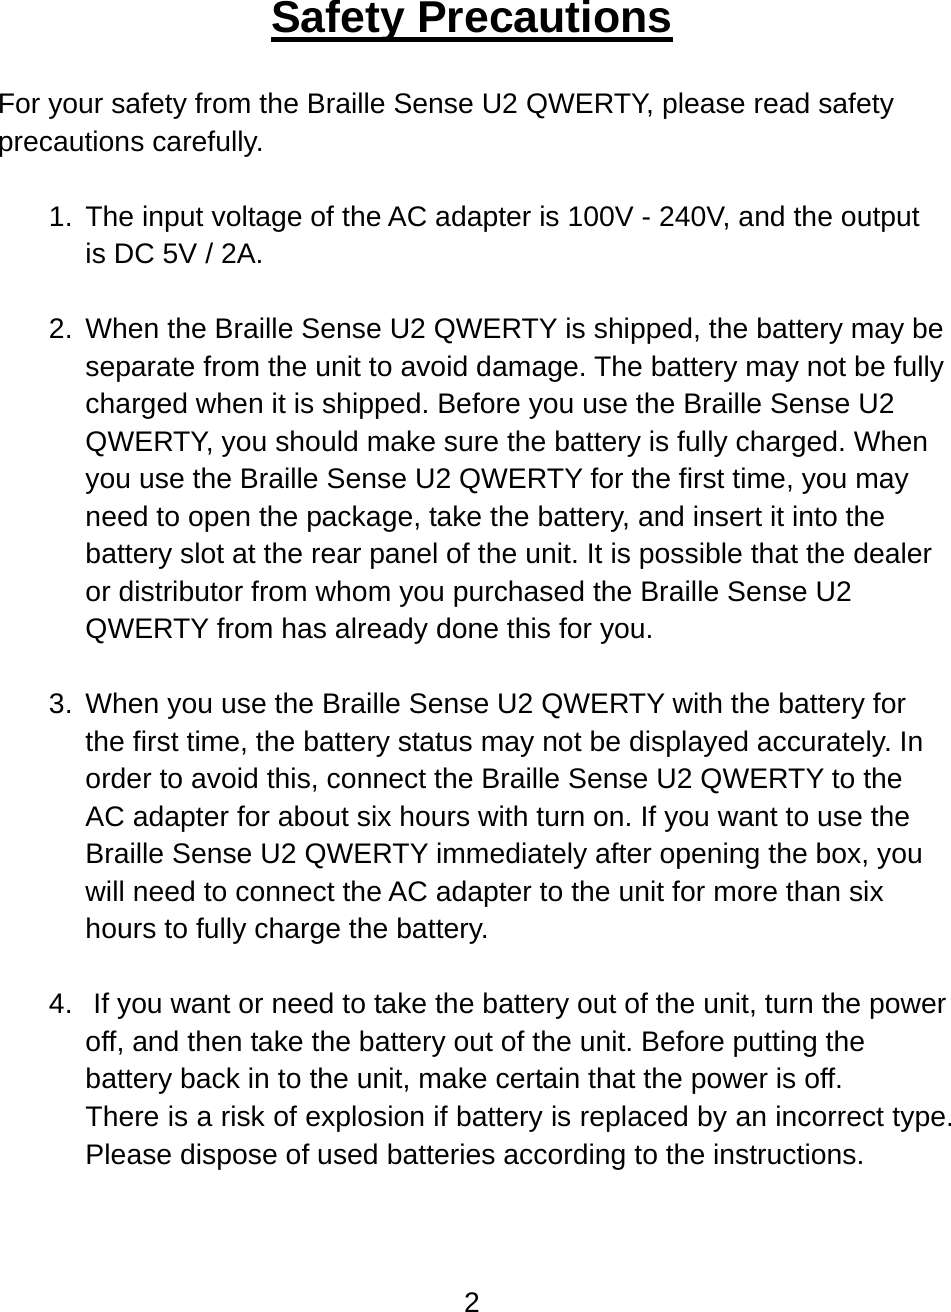 2  Safety Precautions  For your safety from the Braille Sense U2 QWERTY, please read safety precautions carefully.  1. The input voltage of the AC adapter is 100V - 240V, and the output is DC 5V / 2A.  2.  When the Braille Sense U2 QWERTY is shipped, the battery may be separate from the unit to avoid damage. The battery may not be fully charged when it is shipped. Before you use the Braille Sense U2 QWERTY, you should make sure the battery is fully charged. When you use the Braille Sense U2 QWERTY for the first time, you may need to open the package, take the battery, and insert it into the battery slot at the rear panel of the unit. It is possible that the dealer or distributor from whom you purchased the Braille Sense U2 QWERTY from has already done this for you.  3.  When you use the Braille Sense U2 QWERTY with the battery for the first time, the battery status may not be displayed accurately. In order to avoid this, connect the Braille Sense U2 QWERTY to the AC adapter for about six hours with turn on. If you want to use the Braille Sense U2 QWERTY immediately after opening the box, you will need to connect the AC adapter to the unit for more than six hours to fully charge the battery.  4.   If you want or need to take the battery out of the unit, turn the power off, and then take the battery out of the unit. Before putting the battery back in to the unit, make certain that the power is off. There is a risk of explosion if battery is replaced by an incorrect type. Please dispose of used batteries according to the instructions.  